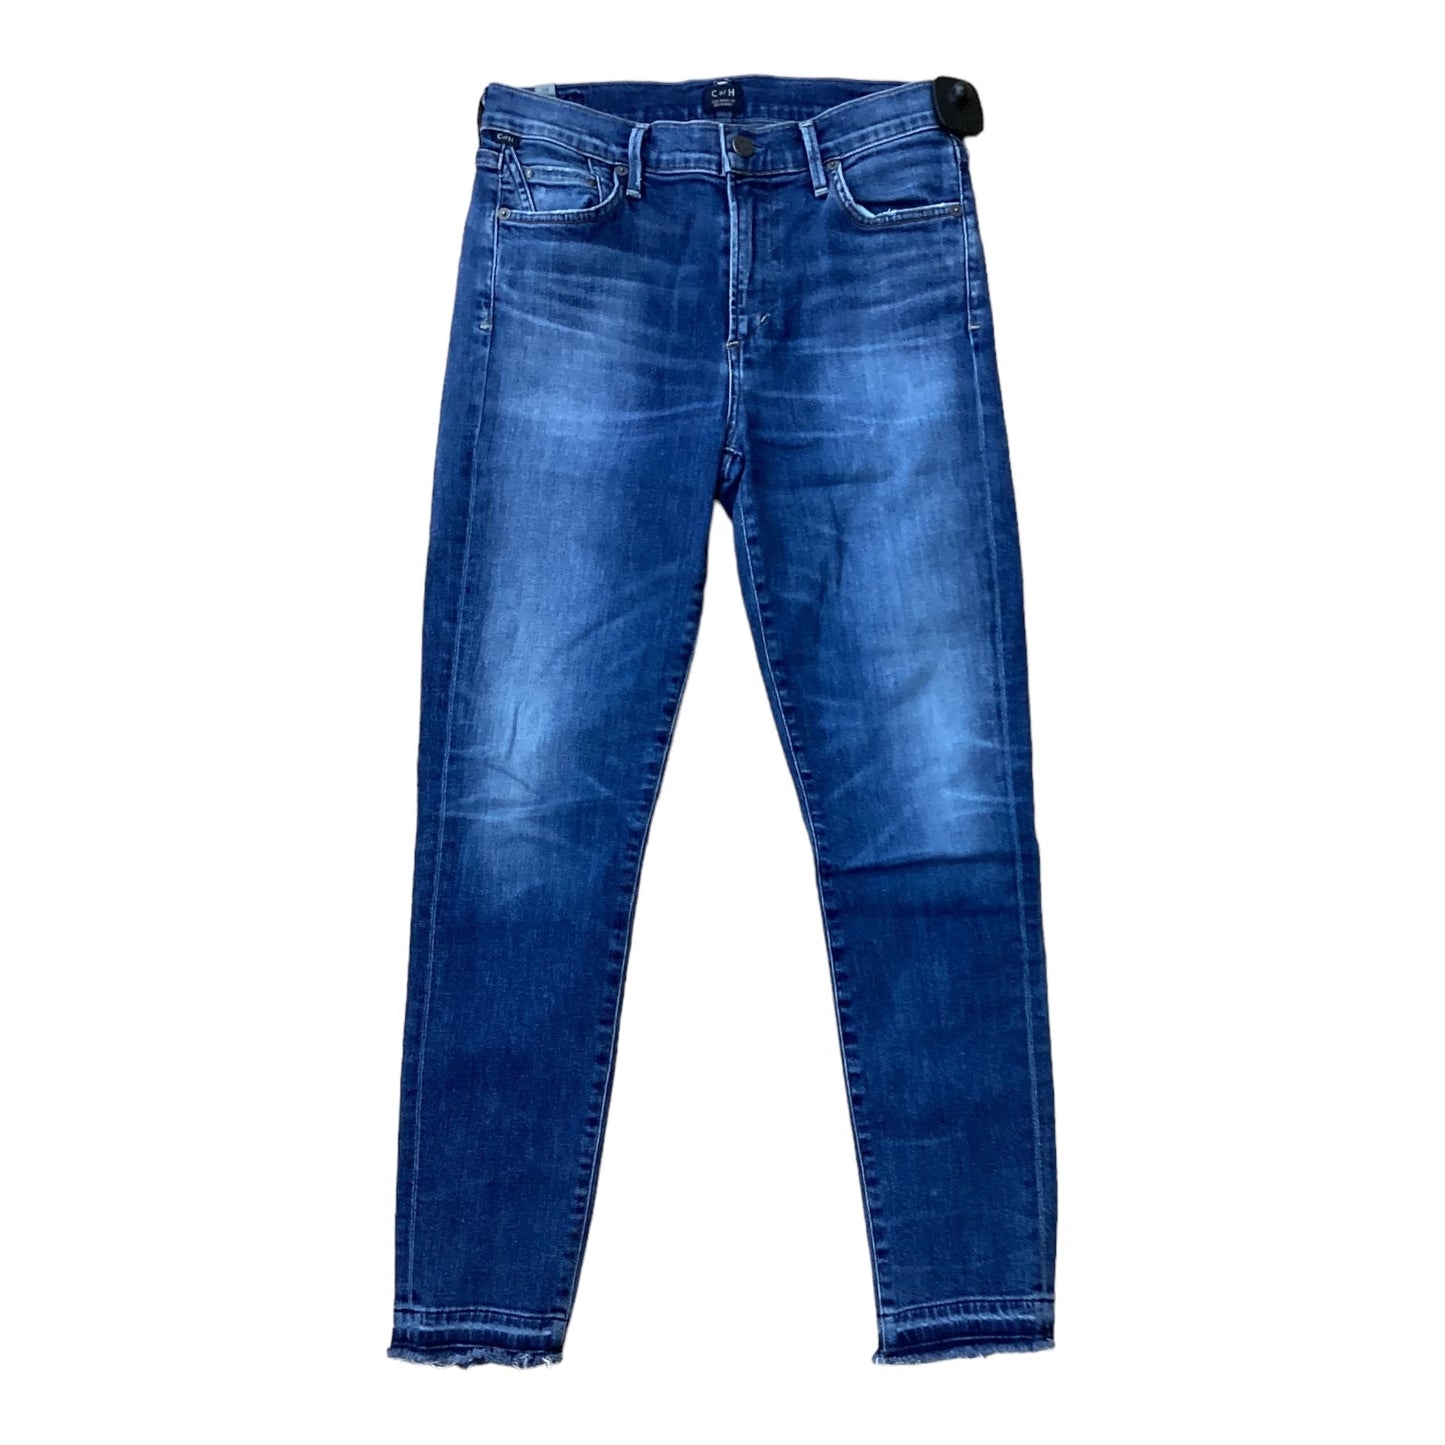 Blue Jeans Designer Citizens Of Humanity, Size 6